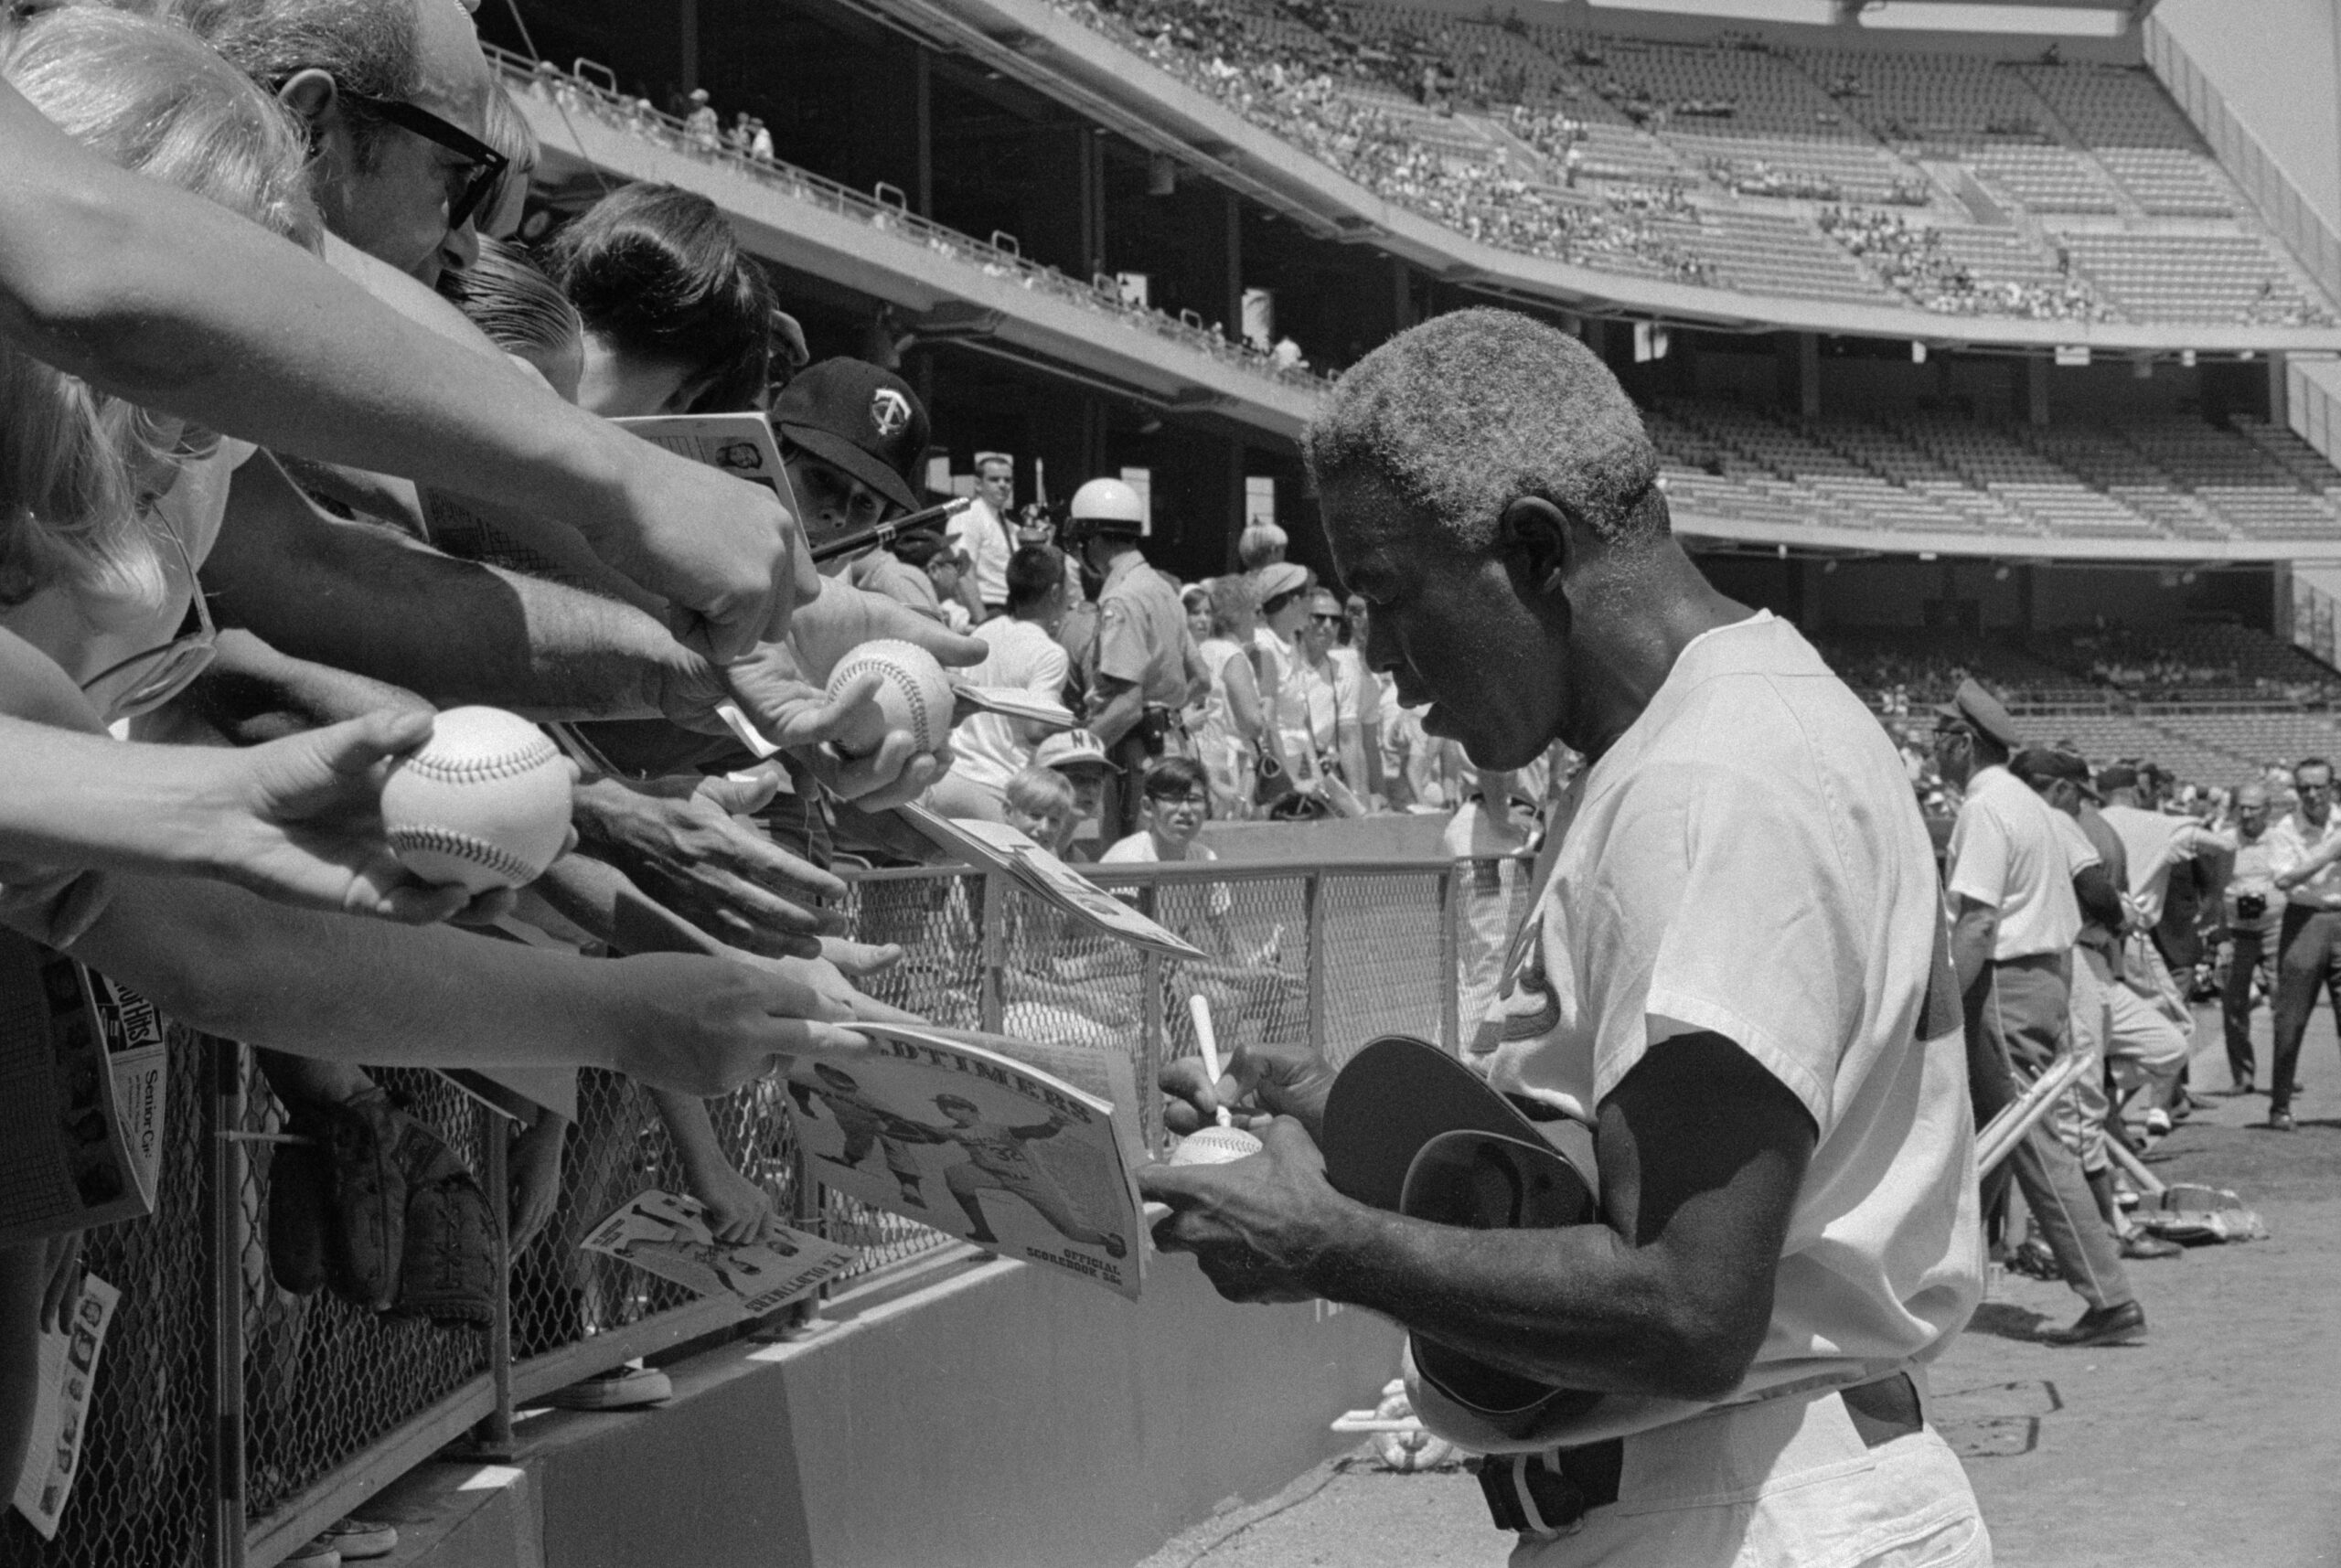 Jackie Robinson Dodgers jersey from rookie year sold for $2.05 million